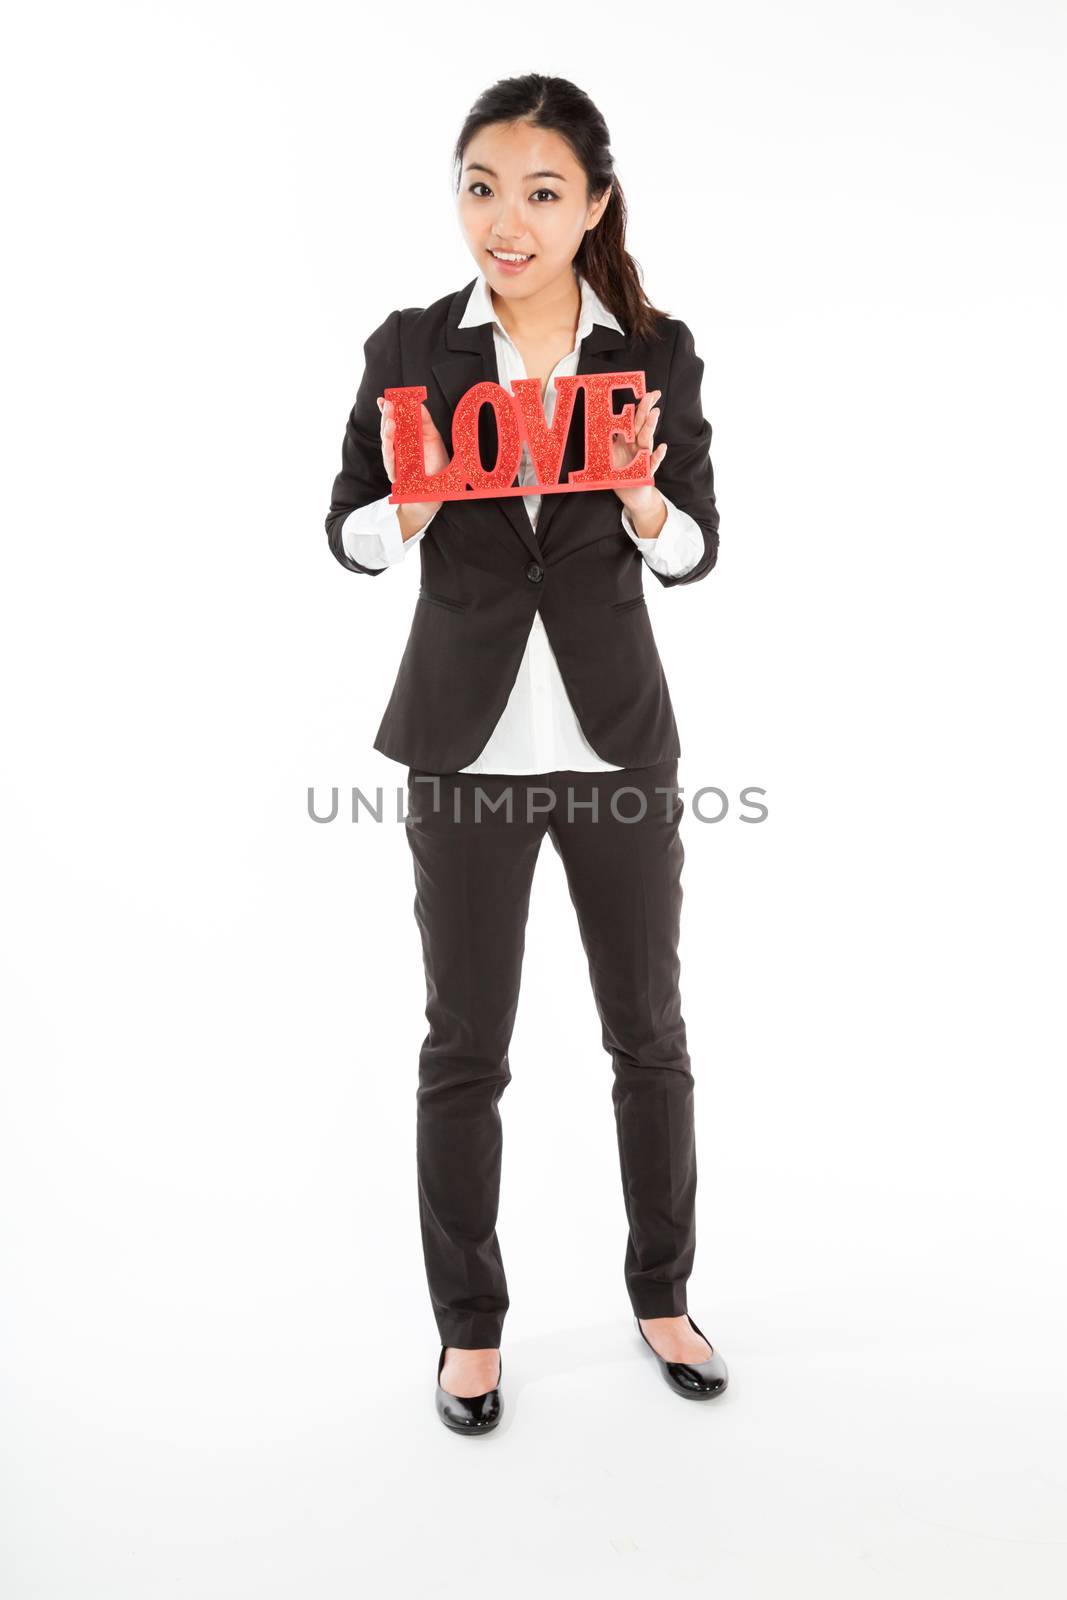 Romantic people in love shot in studio isolated on a white background